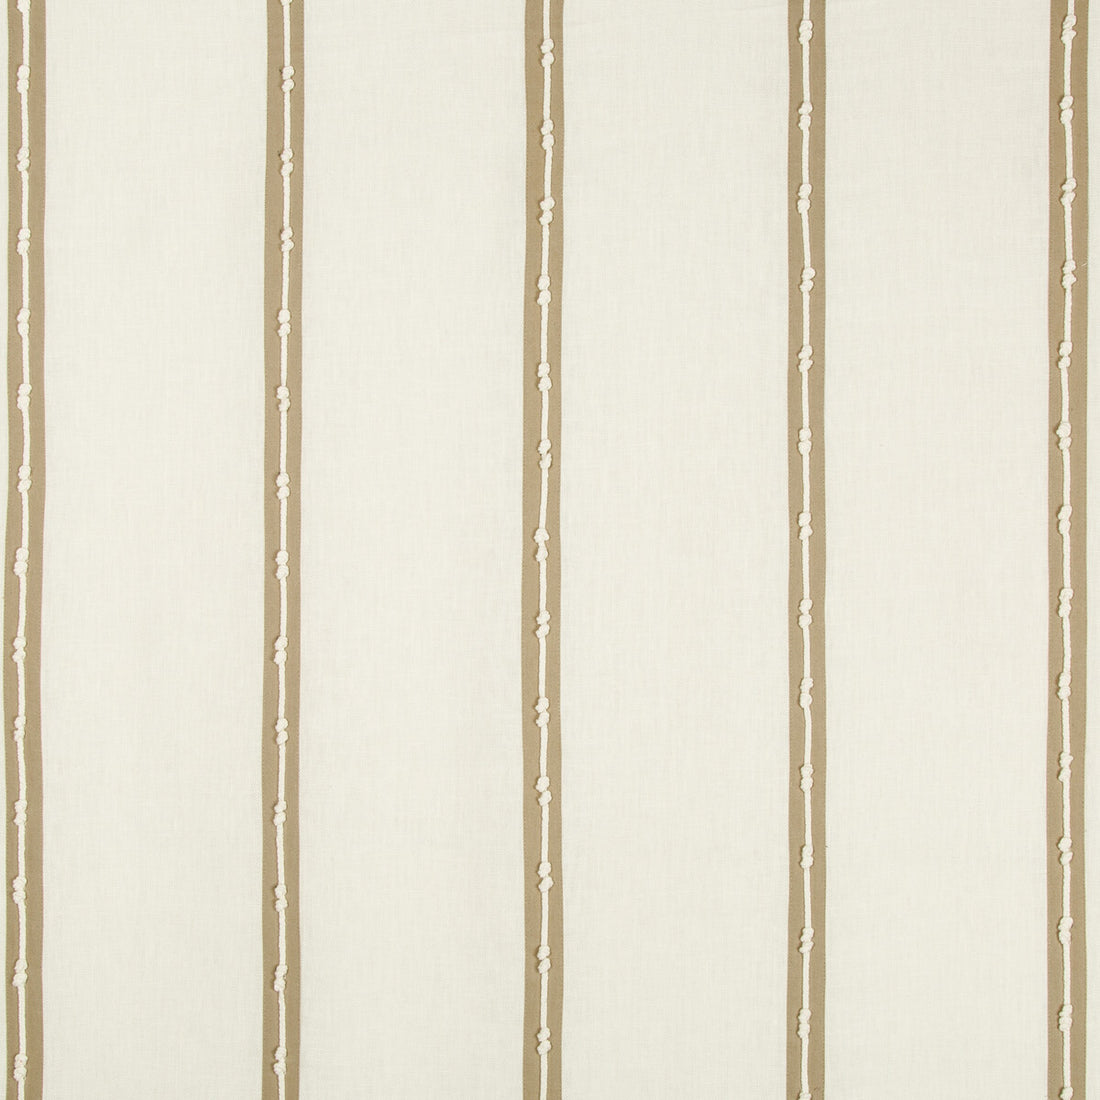 Knots Speed fabric in ivory color - pattern 4630.16.0 - by Kravet Design in the Barclay Butera Sagamore collection